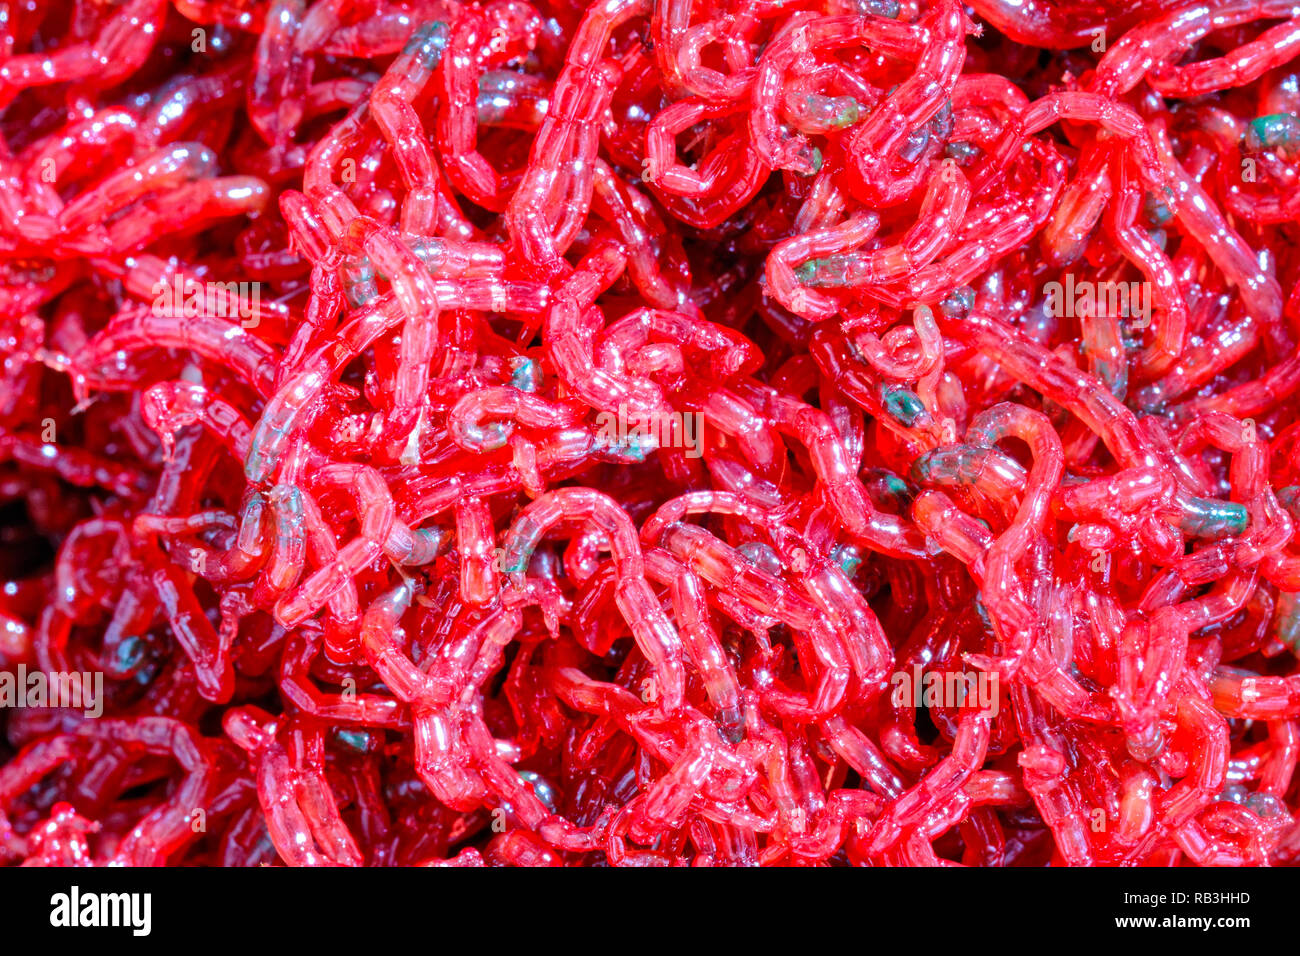 Small bloodworm -red mosquito larvae close-up. Used as fish feed and fishing bait Stock Photo